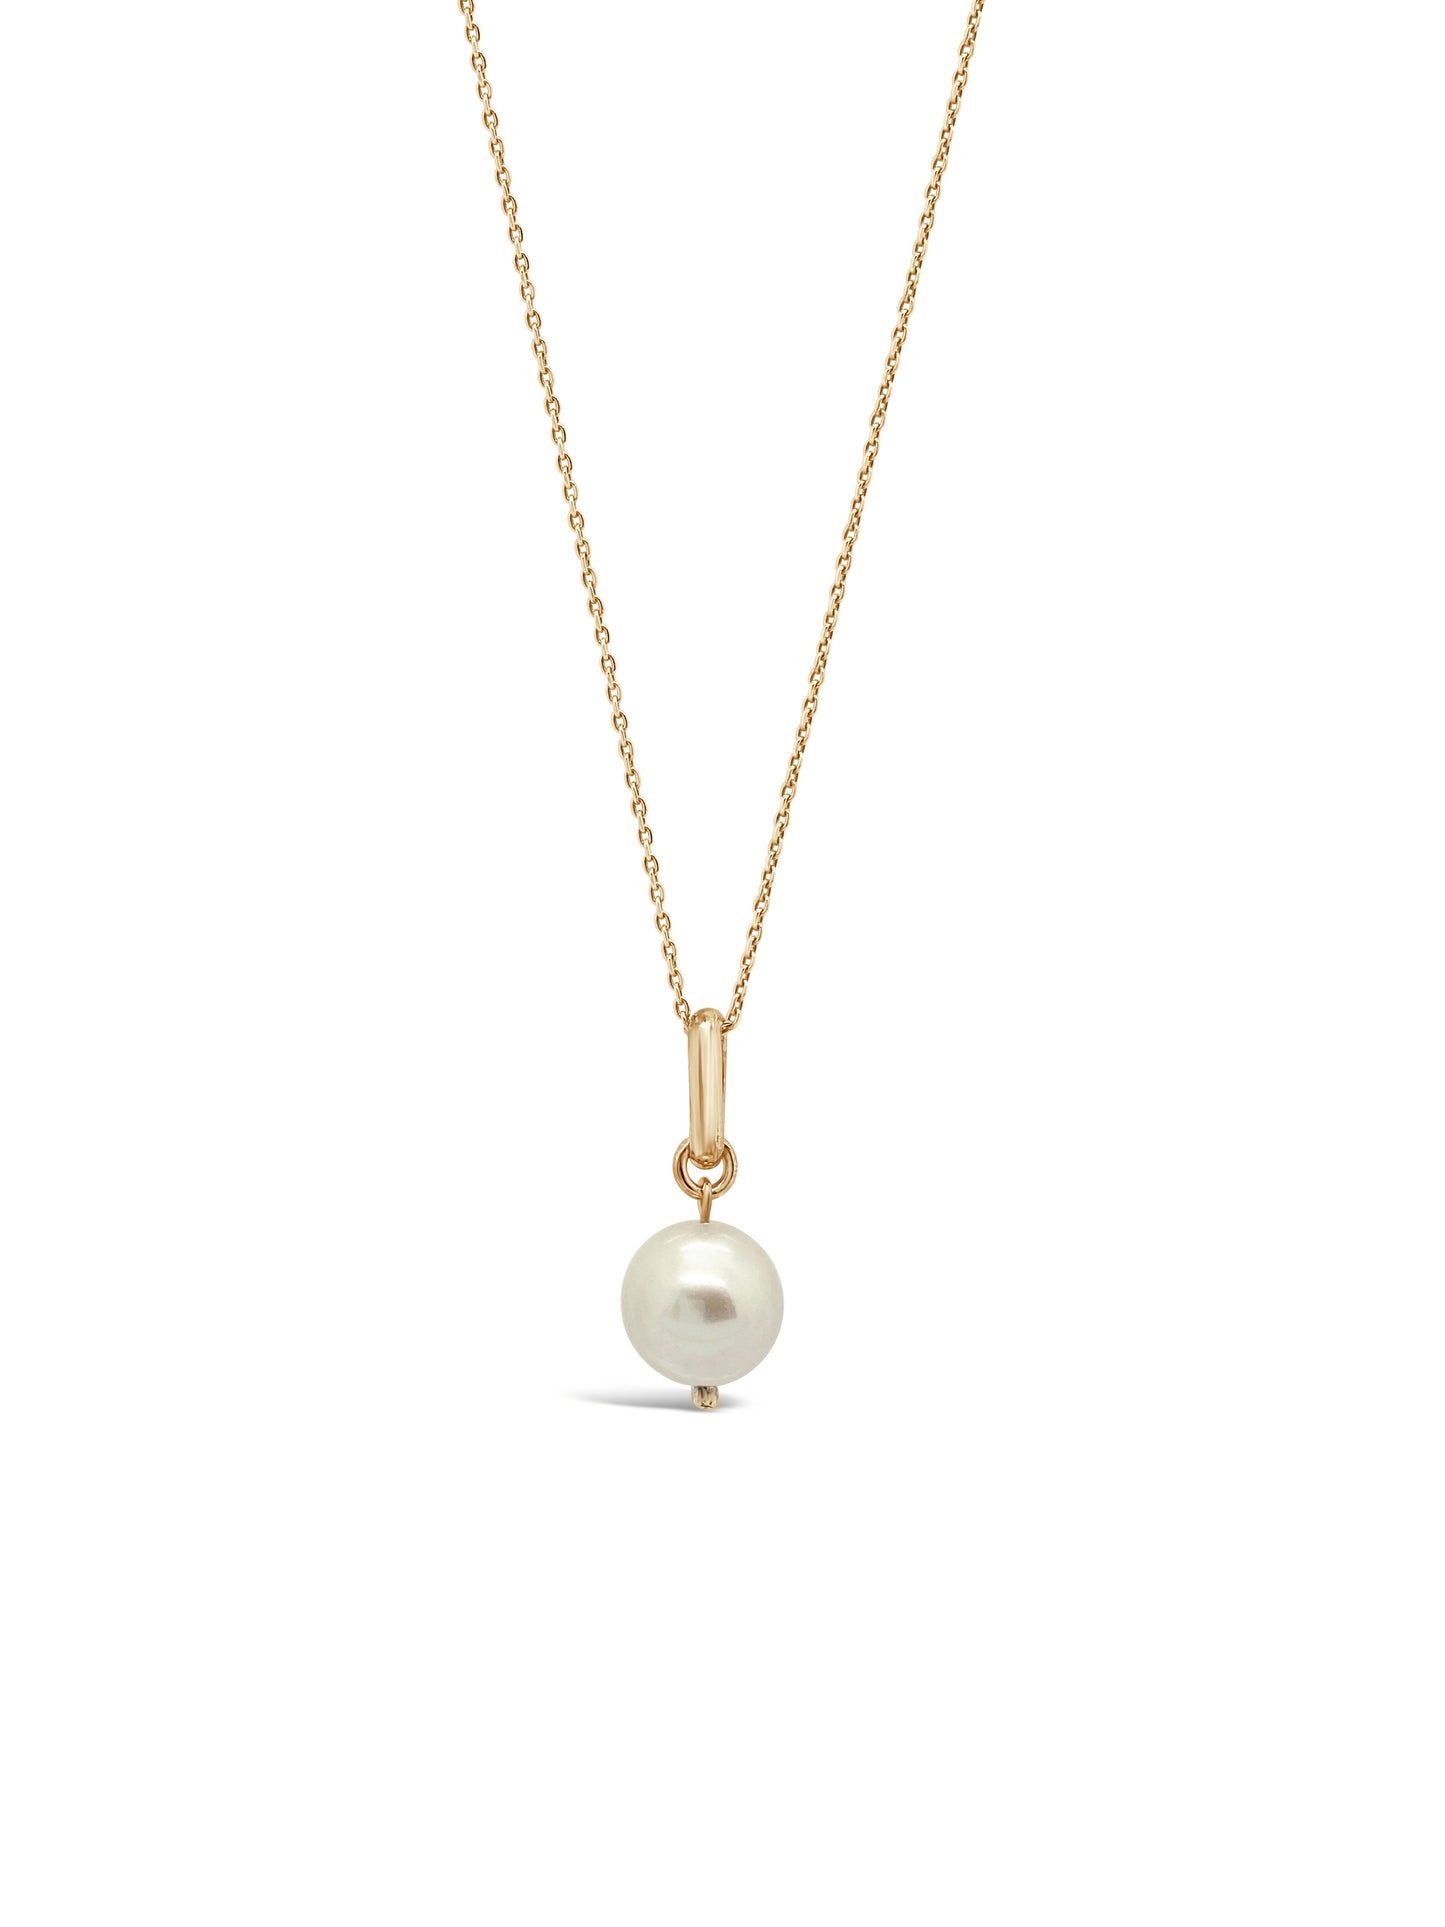 Featured Pearl Necklace, Gold